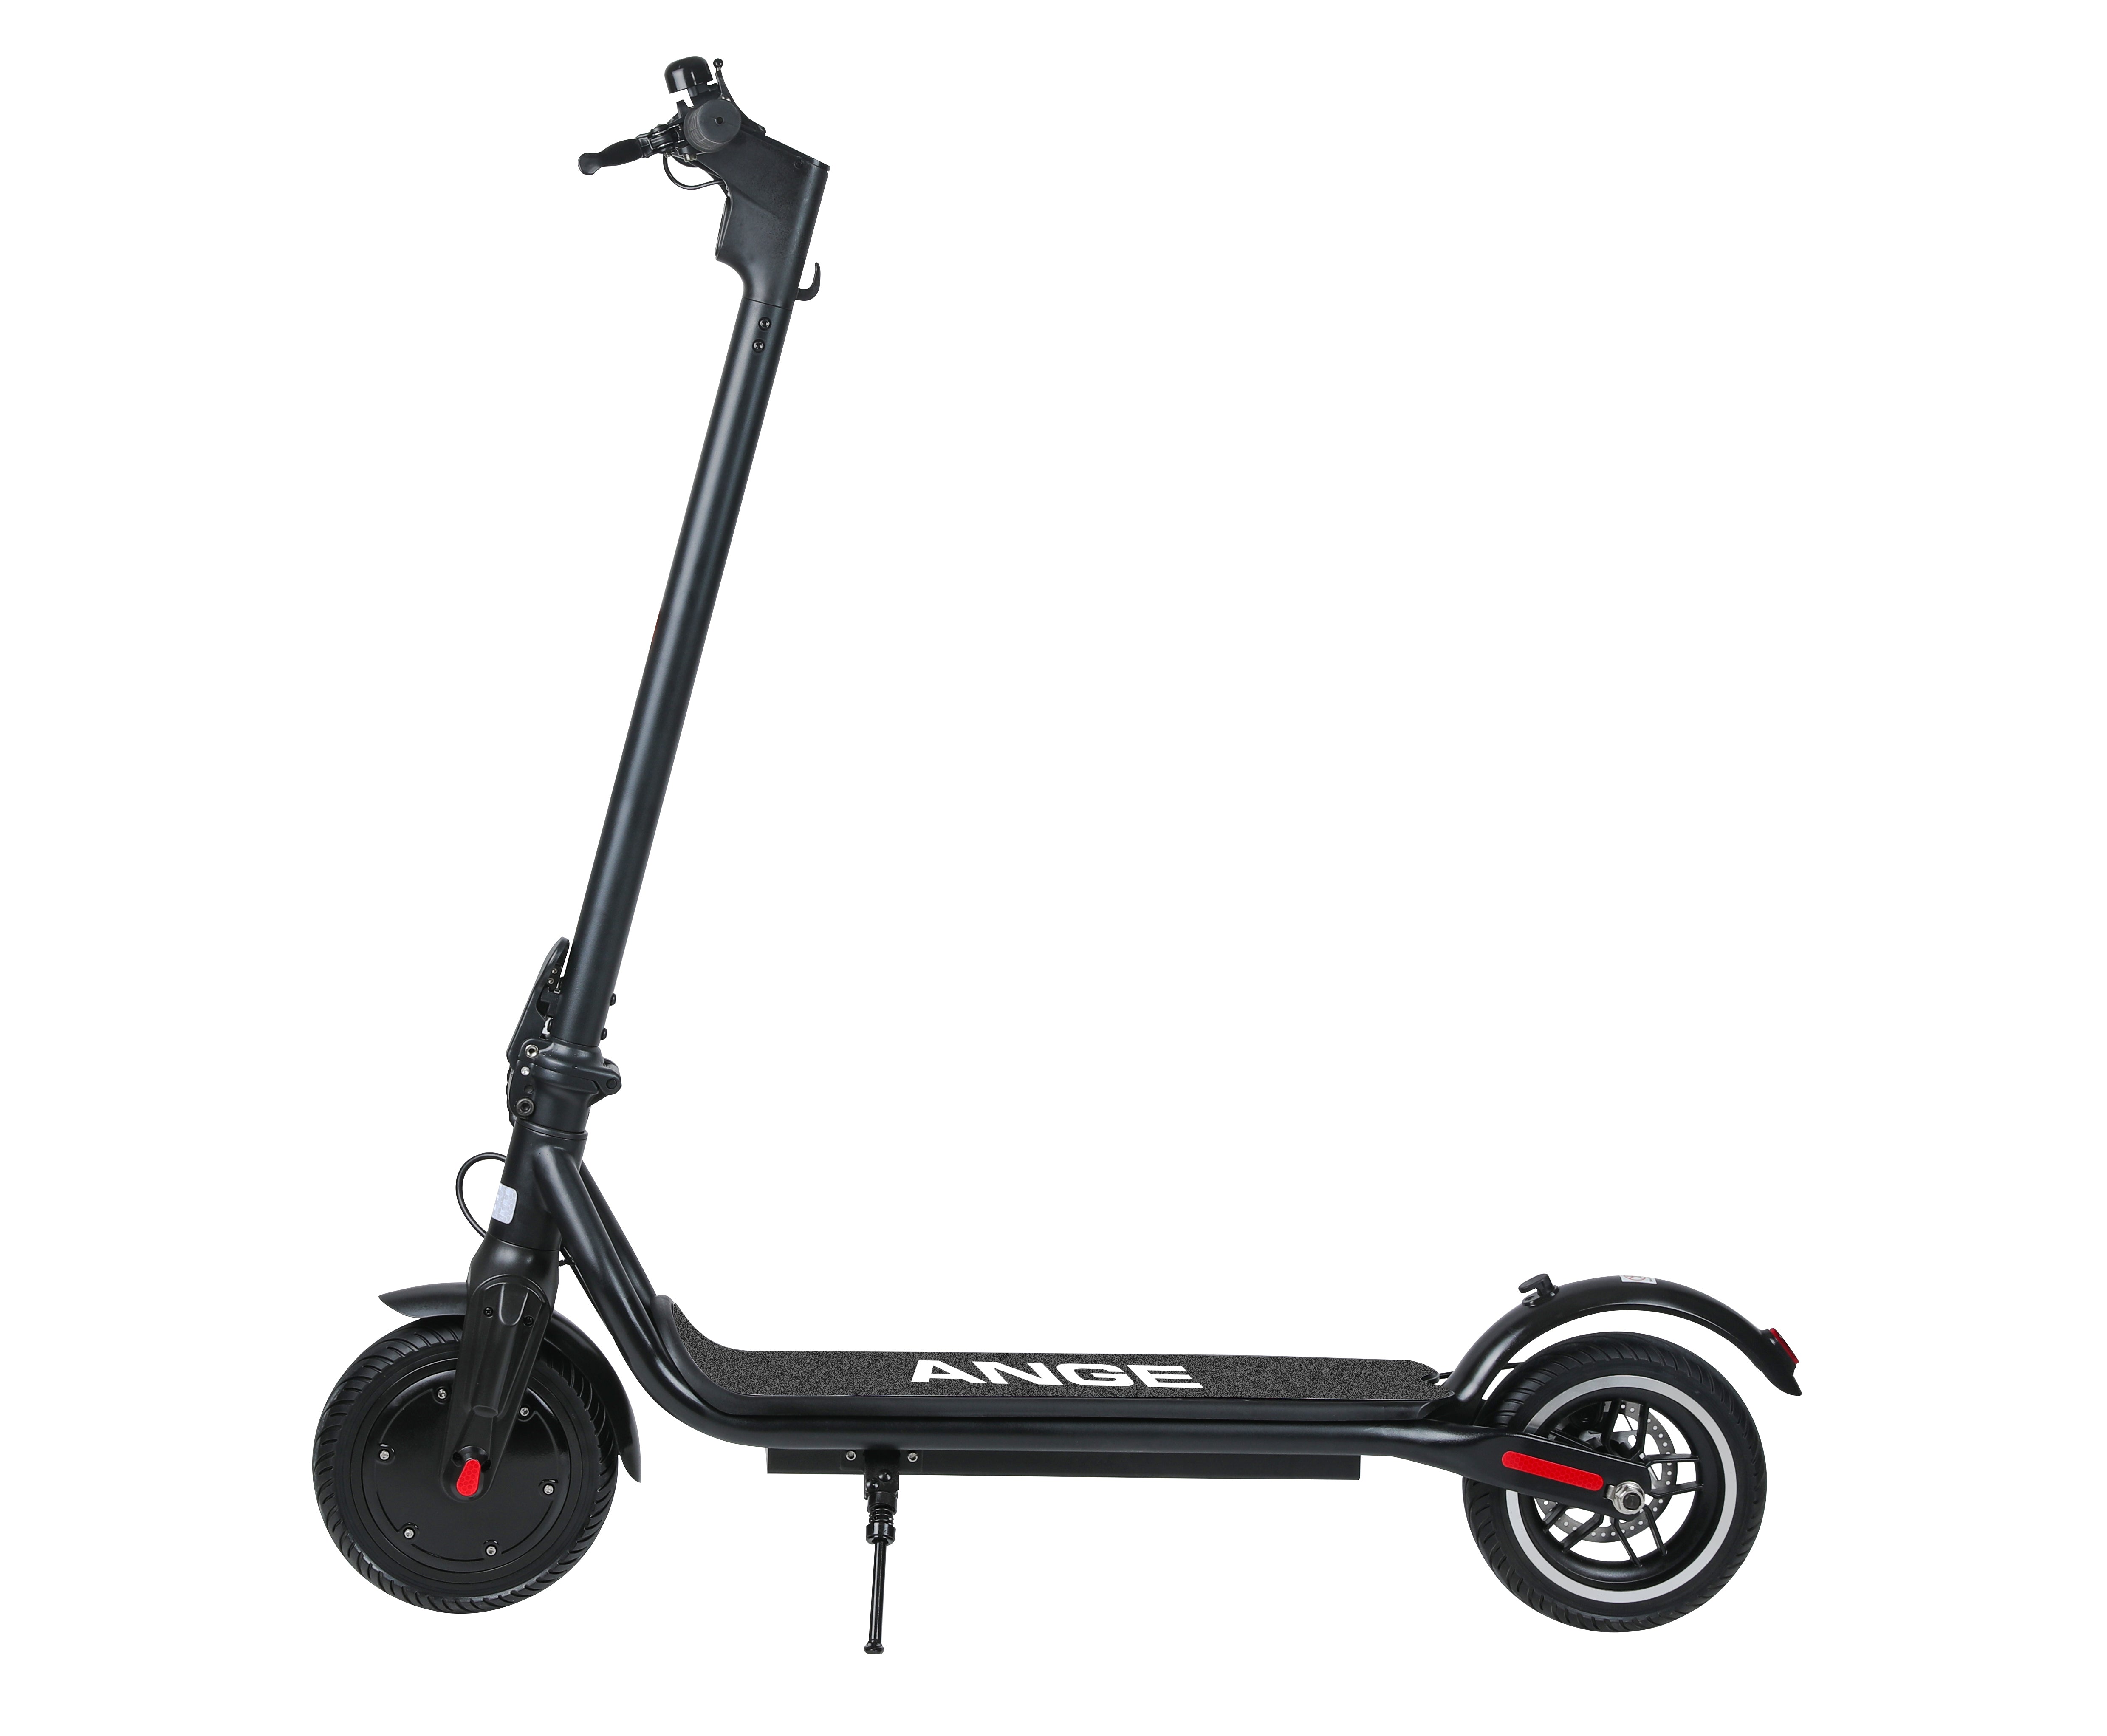 SGX6 Electric scooter - Commuter 350W brushless motor.